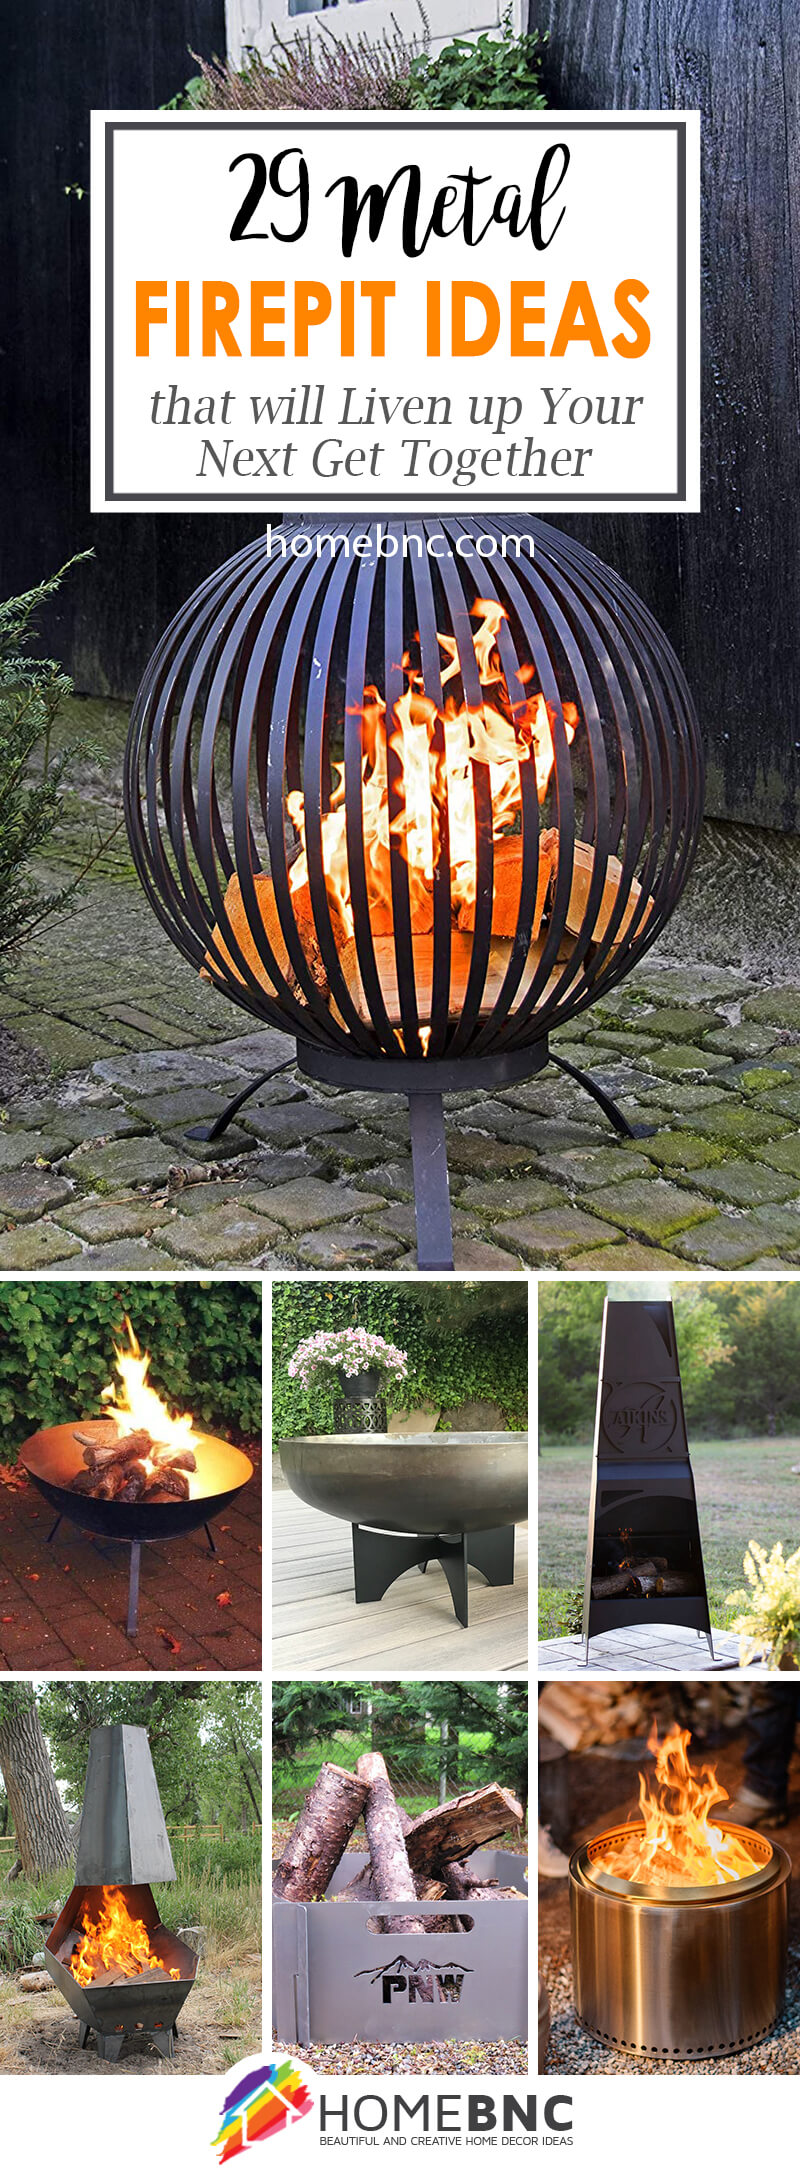 29 Best Metal Fire Pit Ideas To, Fire Pit Made From Propane Tank